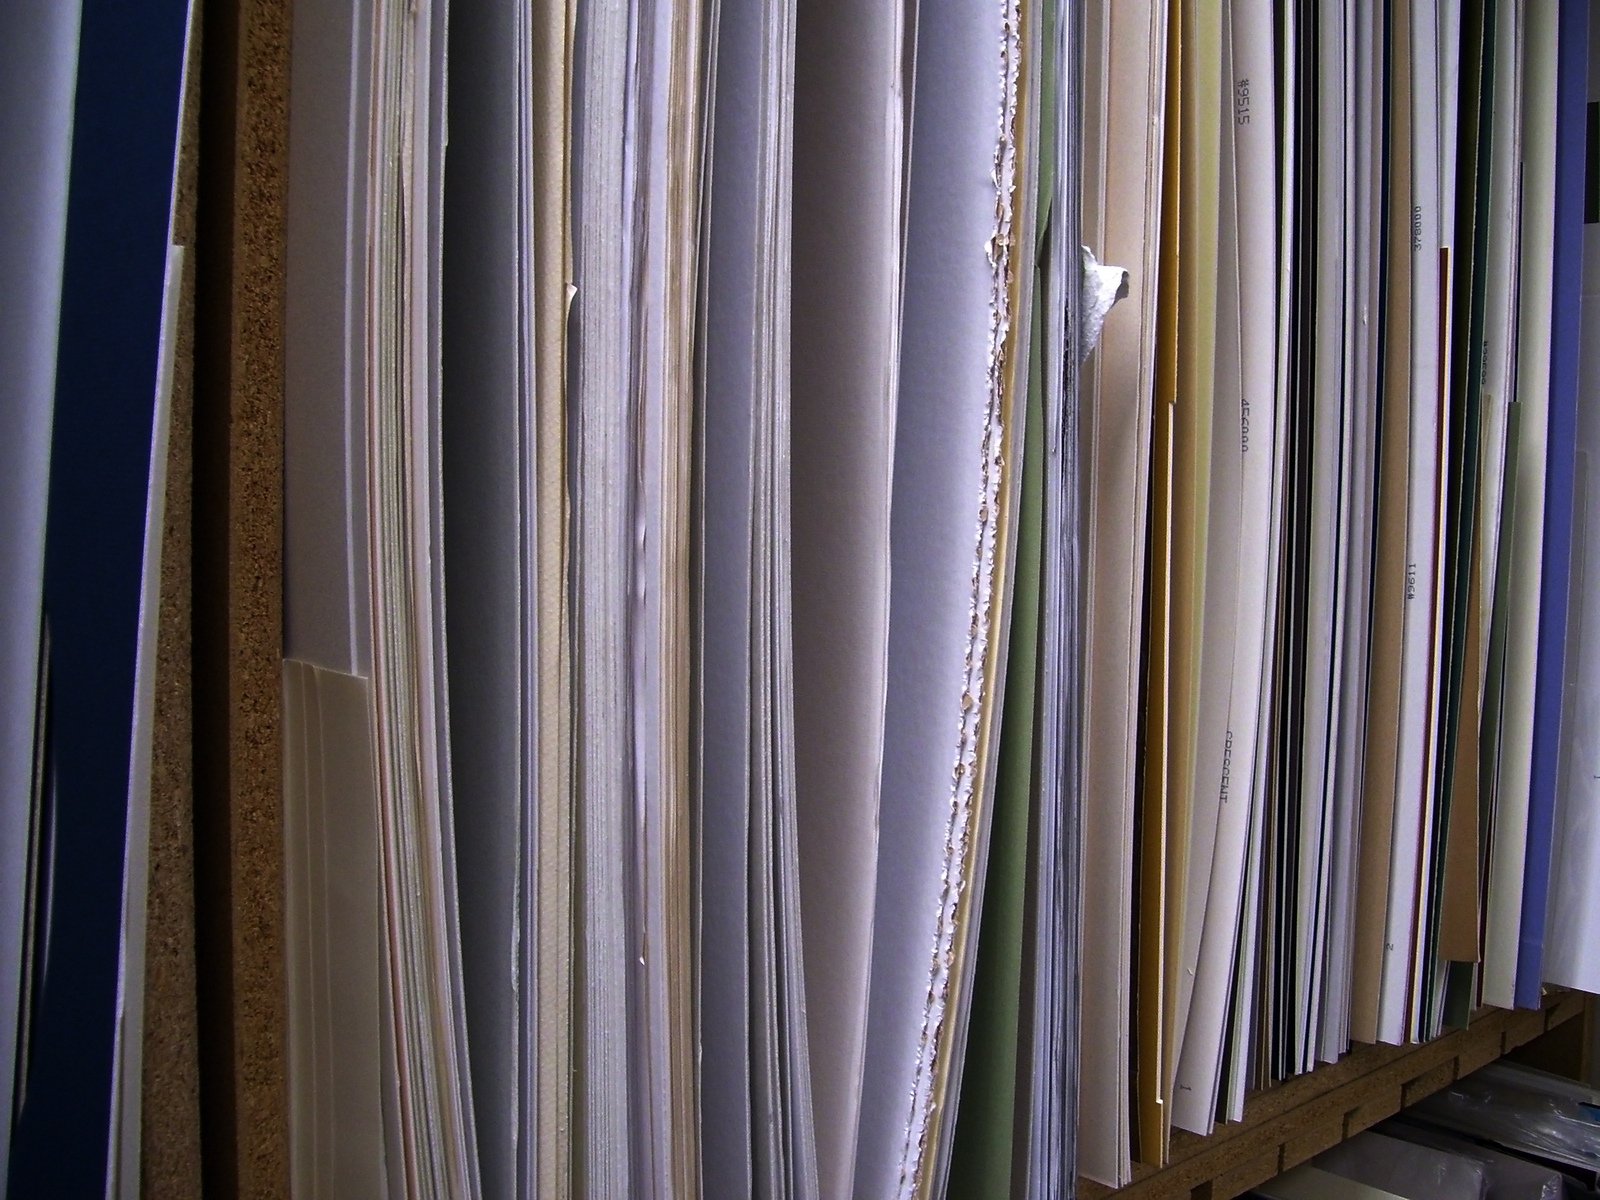 various colored papers and papers hanging on a wooden shelving